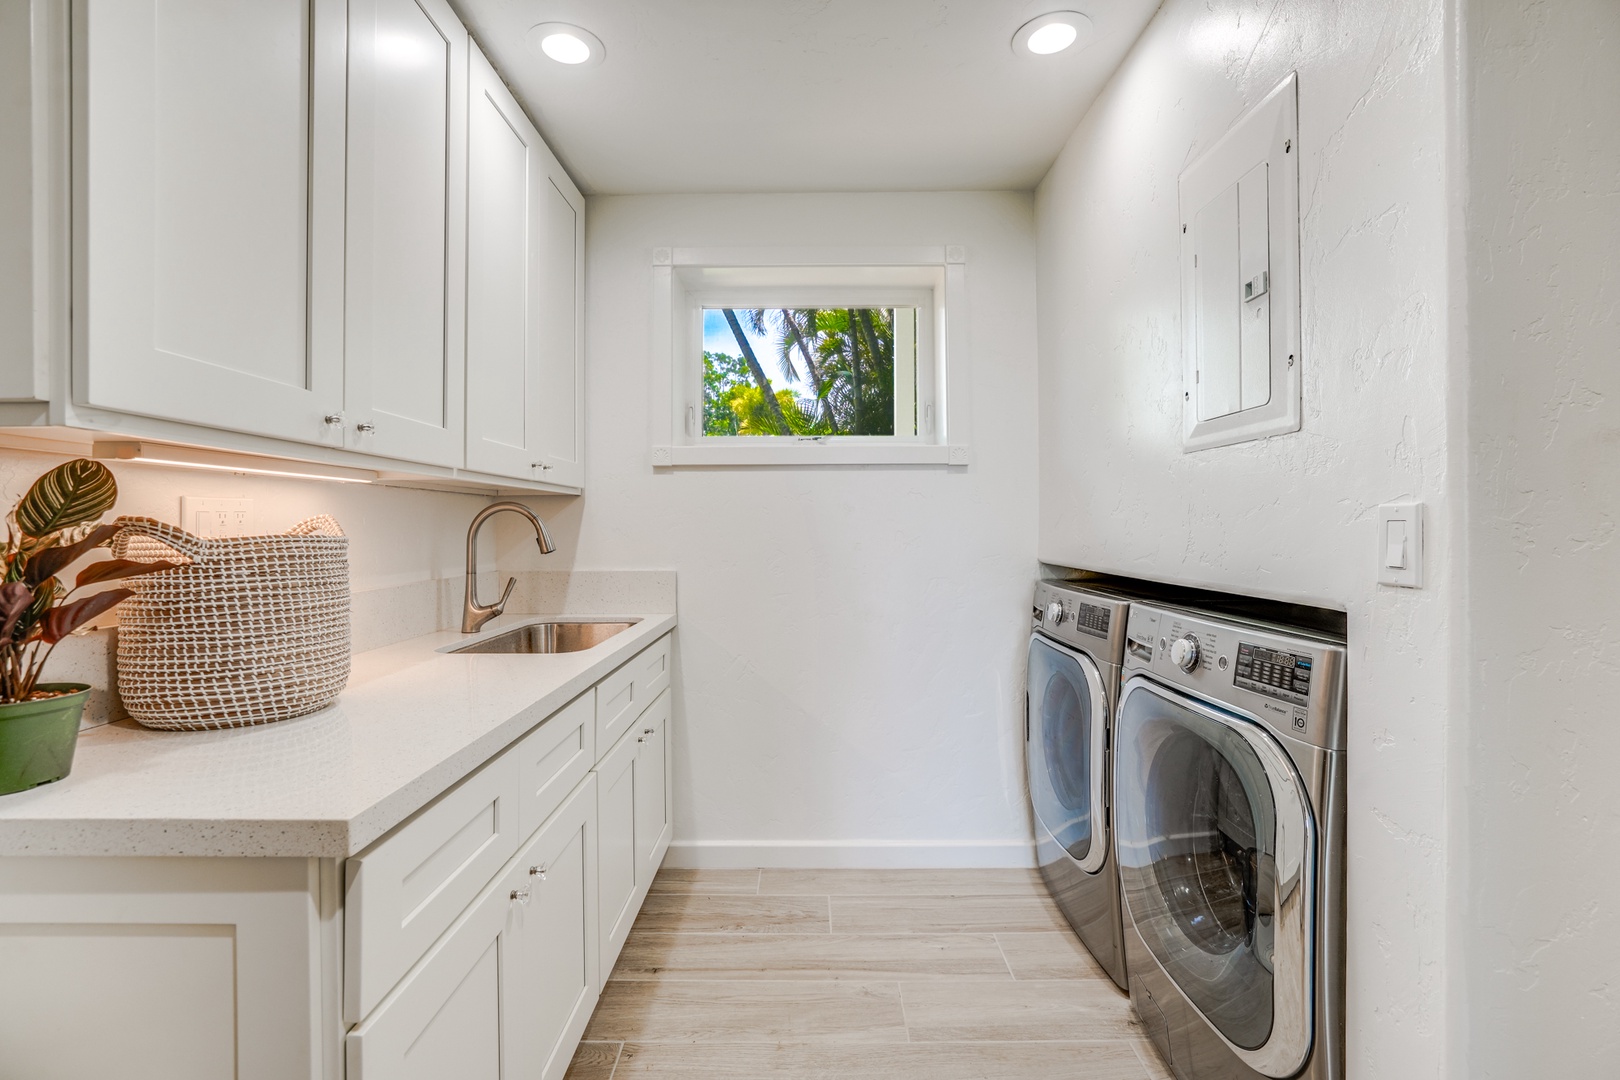 Princeville Vacation Rentals, Wai Lani - A dedicated laundry space with a washer and a dryer